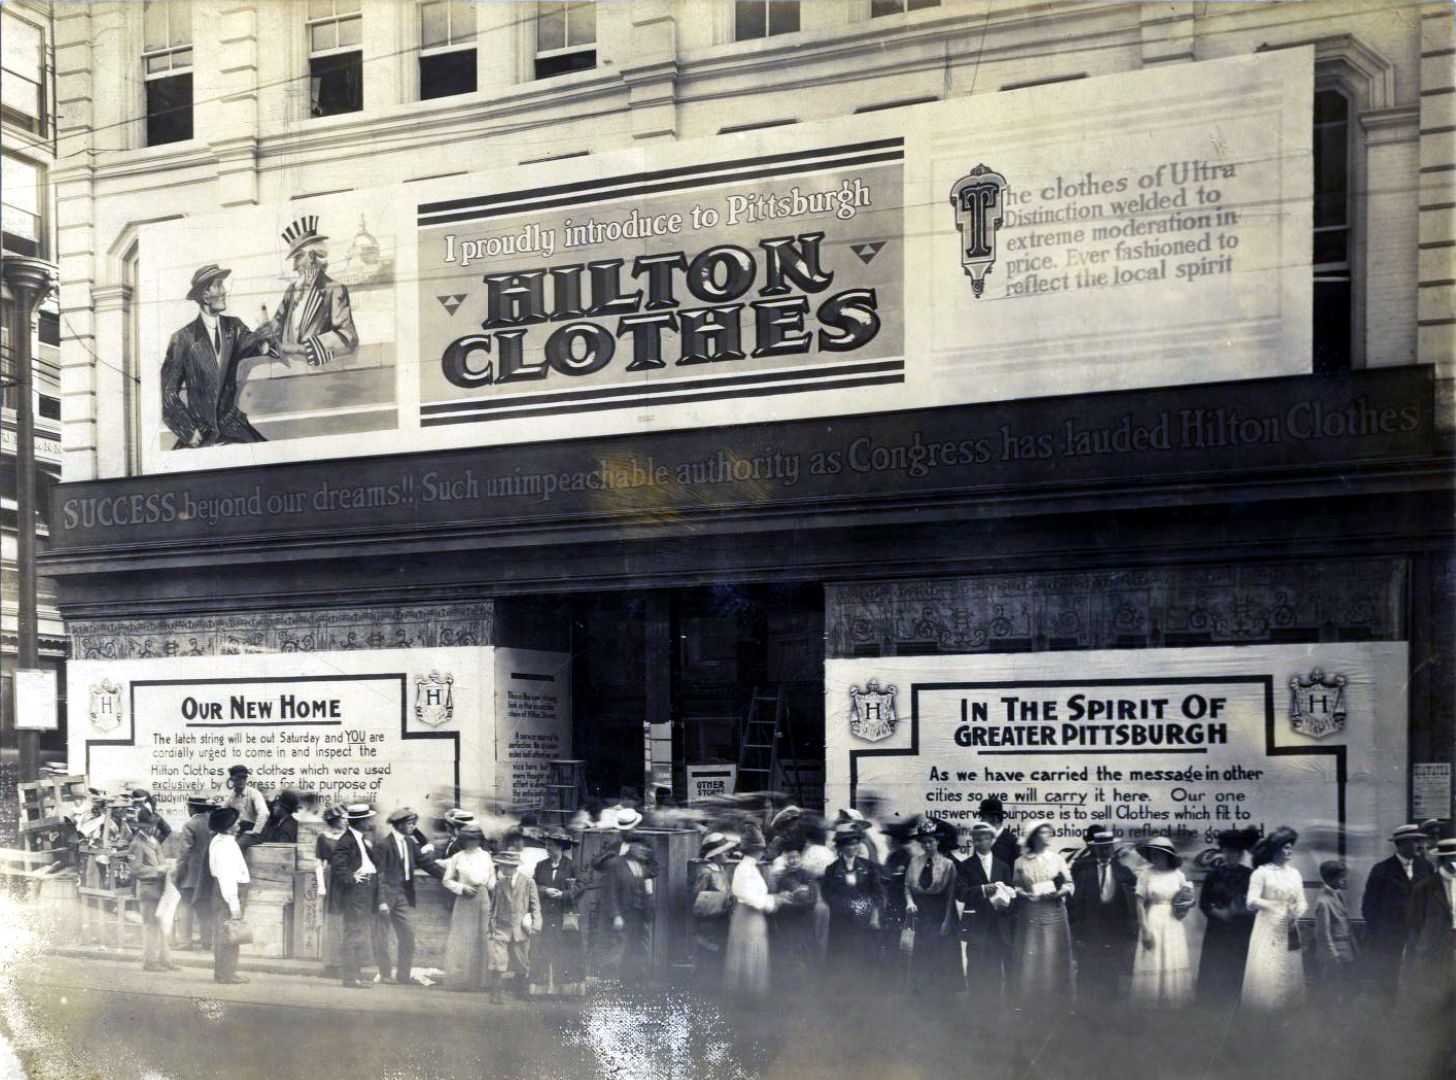 Large retail premises on a corner with huge pieces of signage adorning the building, and a crowd of people in period dress standing waiting outside.